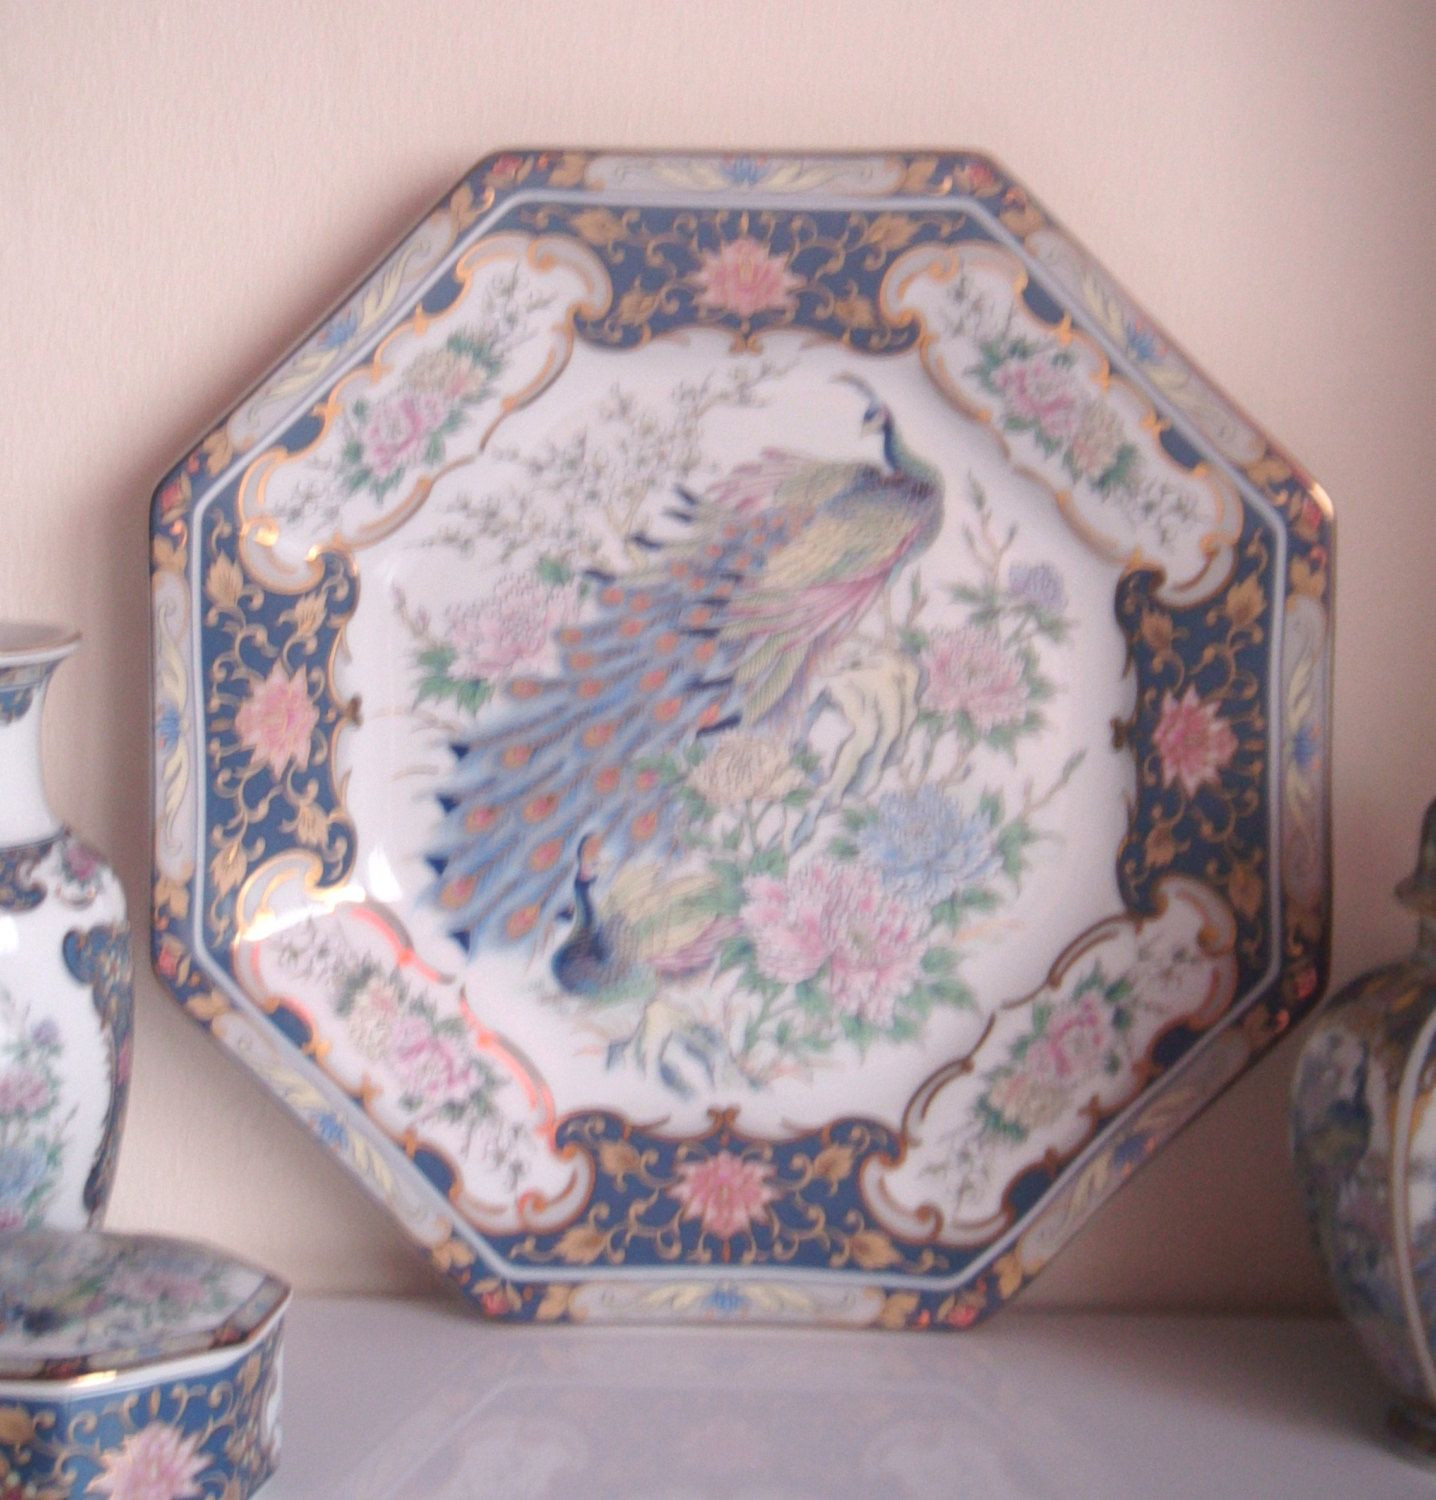 otagiri japan bud vase of reserved for khushi joshi porcelain peacock octagonal plate from the for porcelain peacock octagonal plate from the leonardo collection japan by denabyriches on etsy leonardo collection